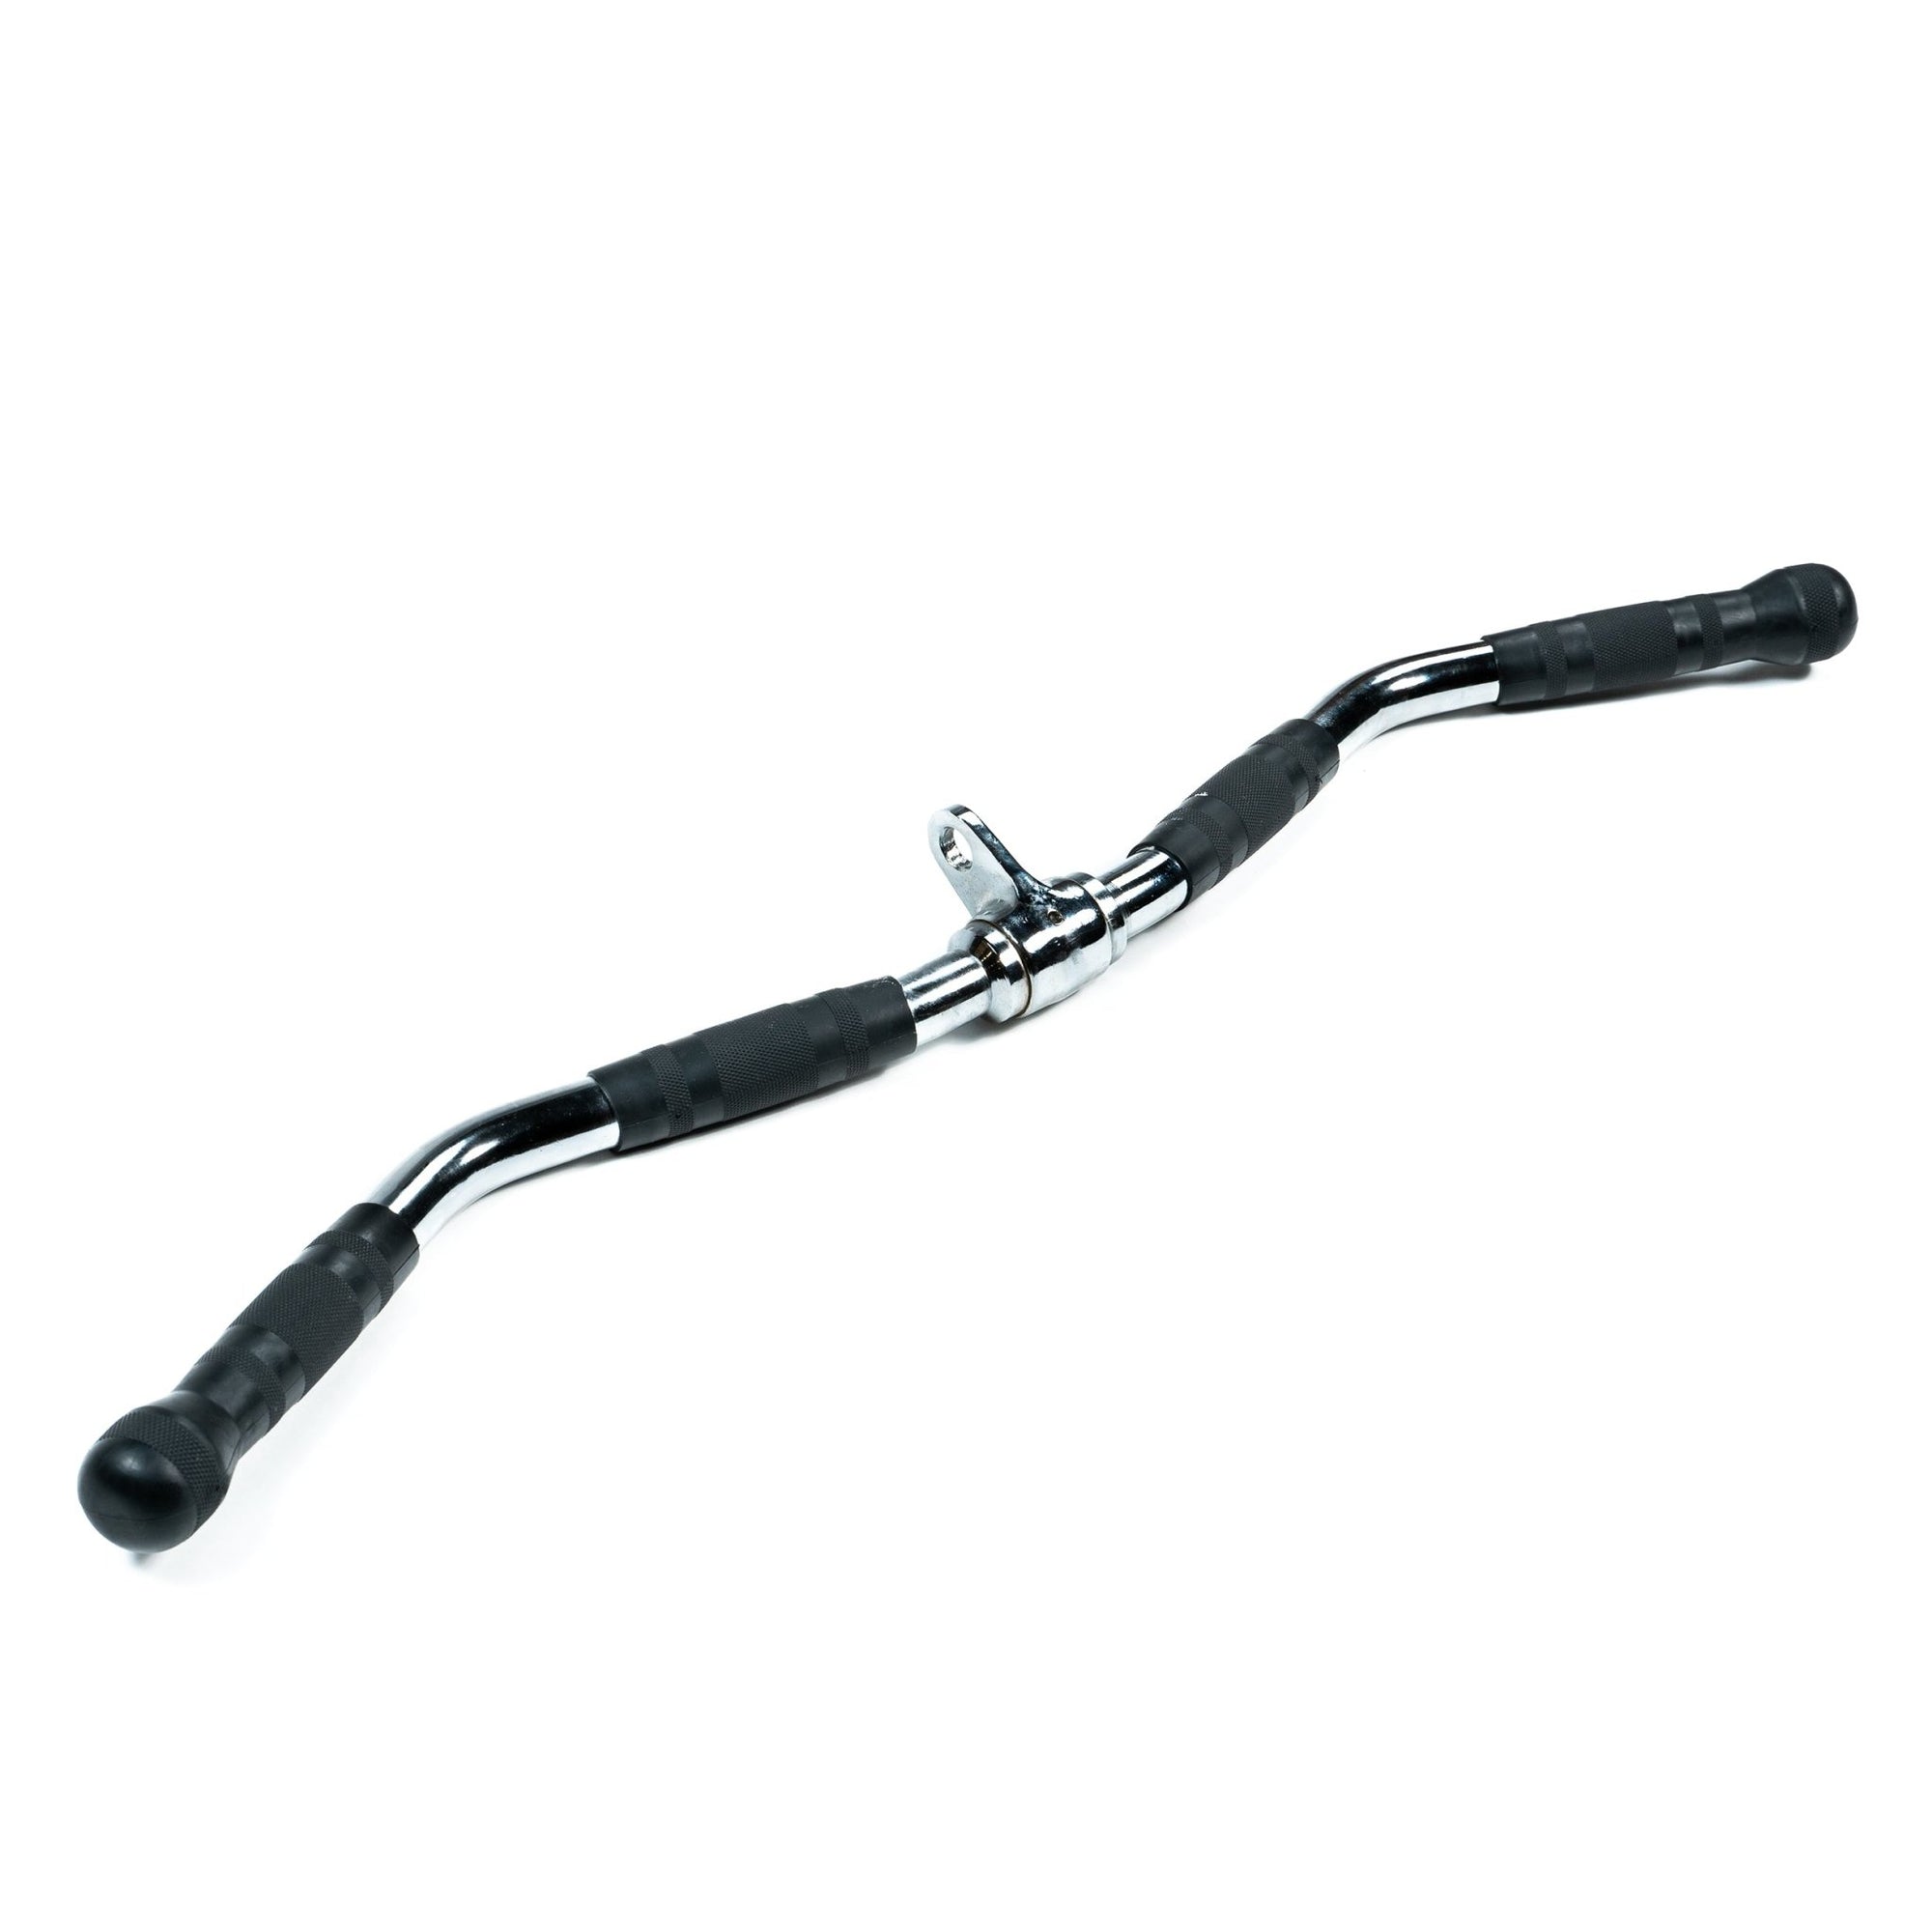 FitWay Equip. Max Grip Revolving Curl Bar 28" - Fitness Experience